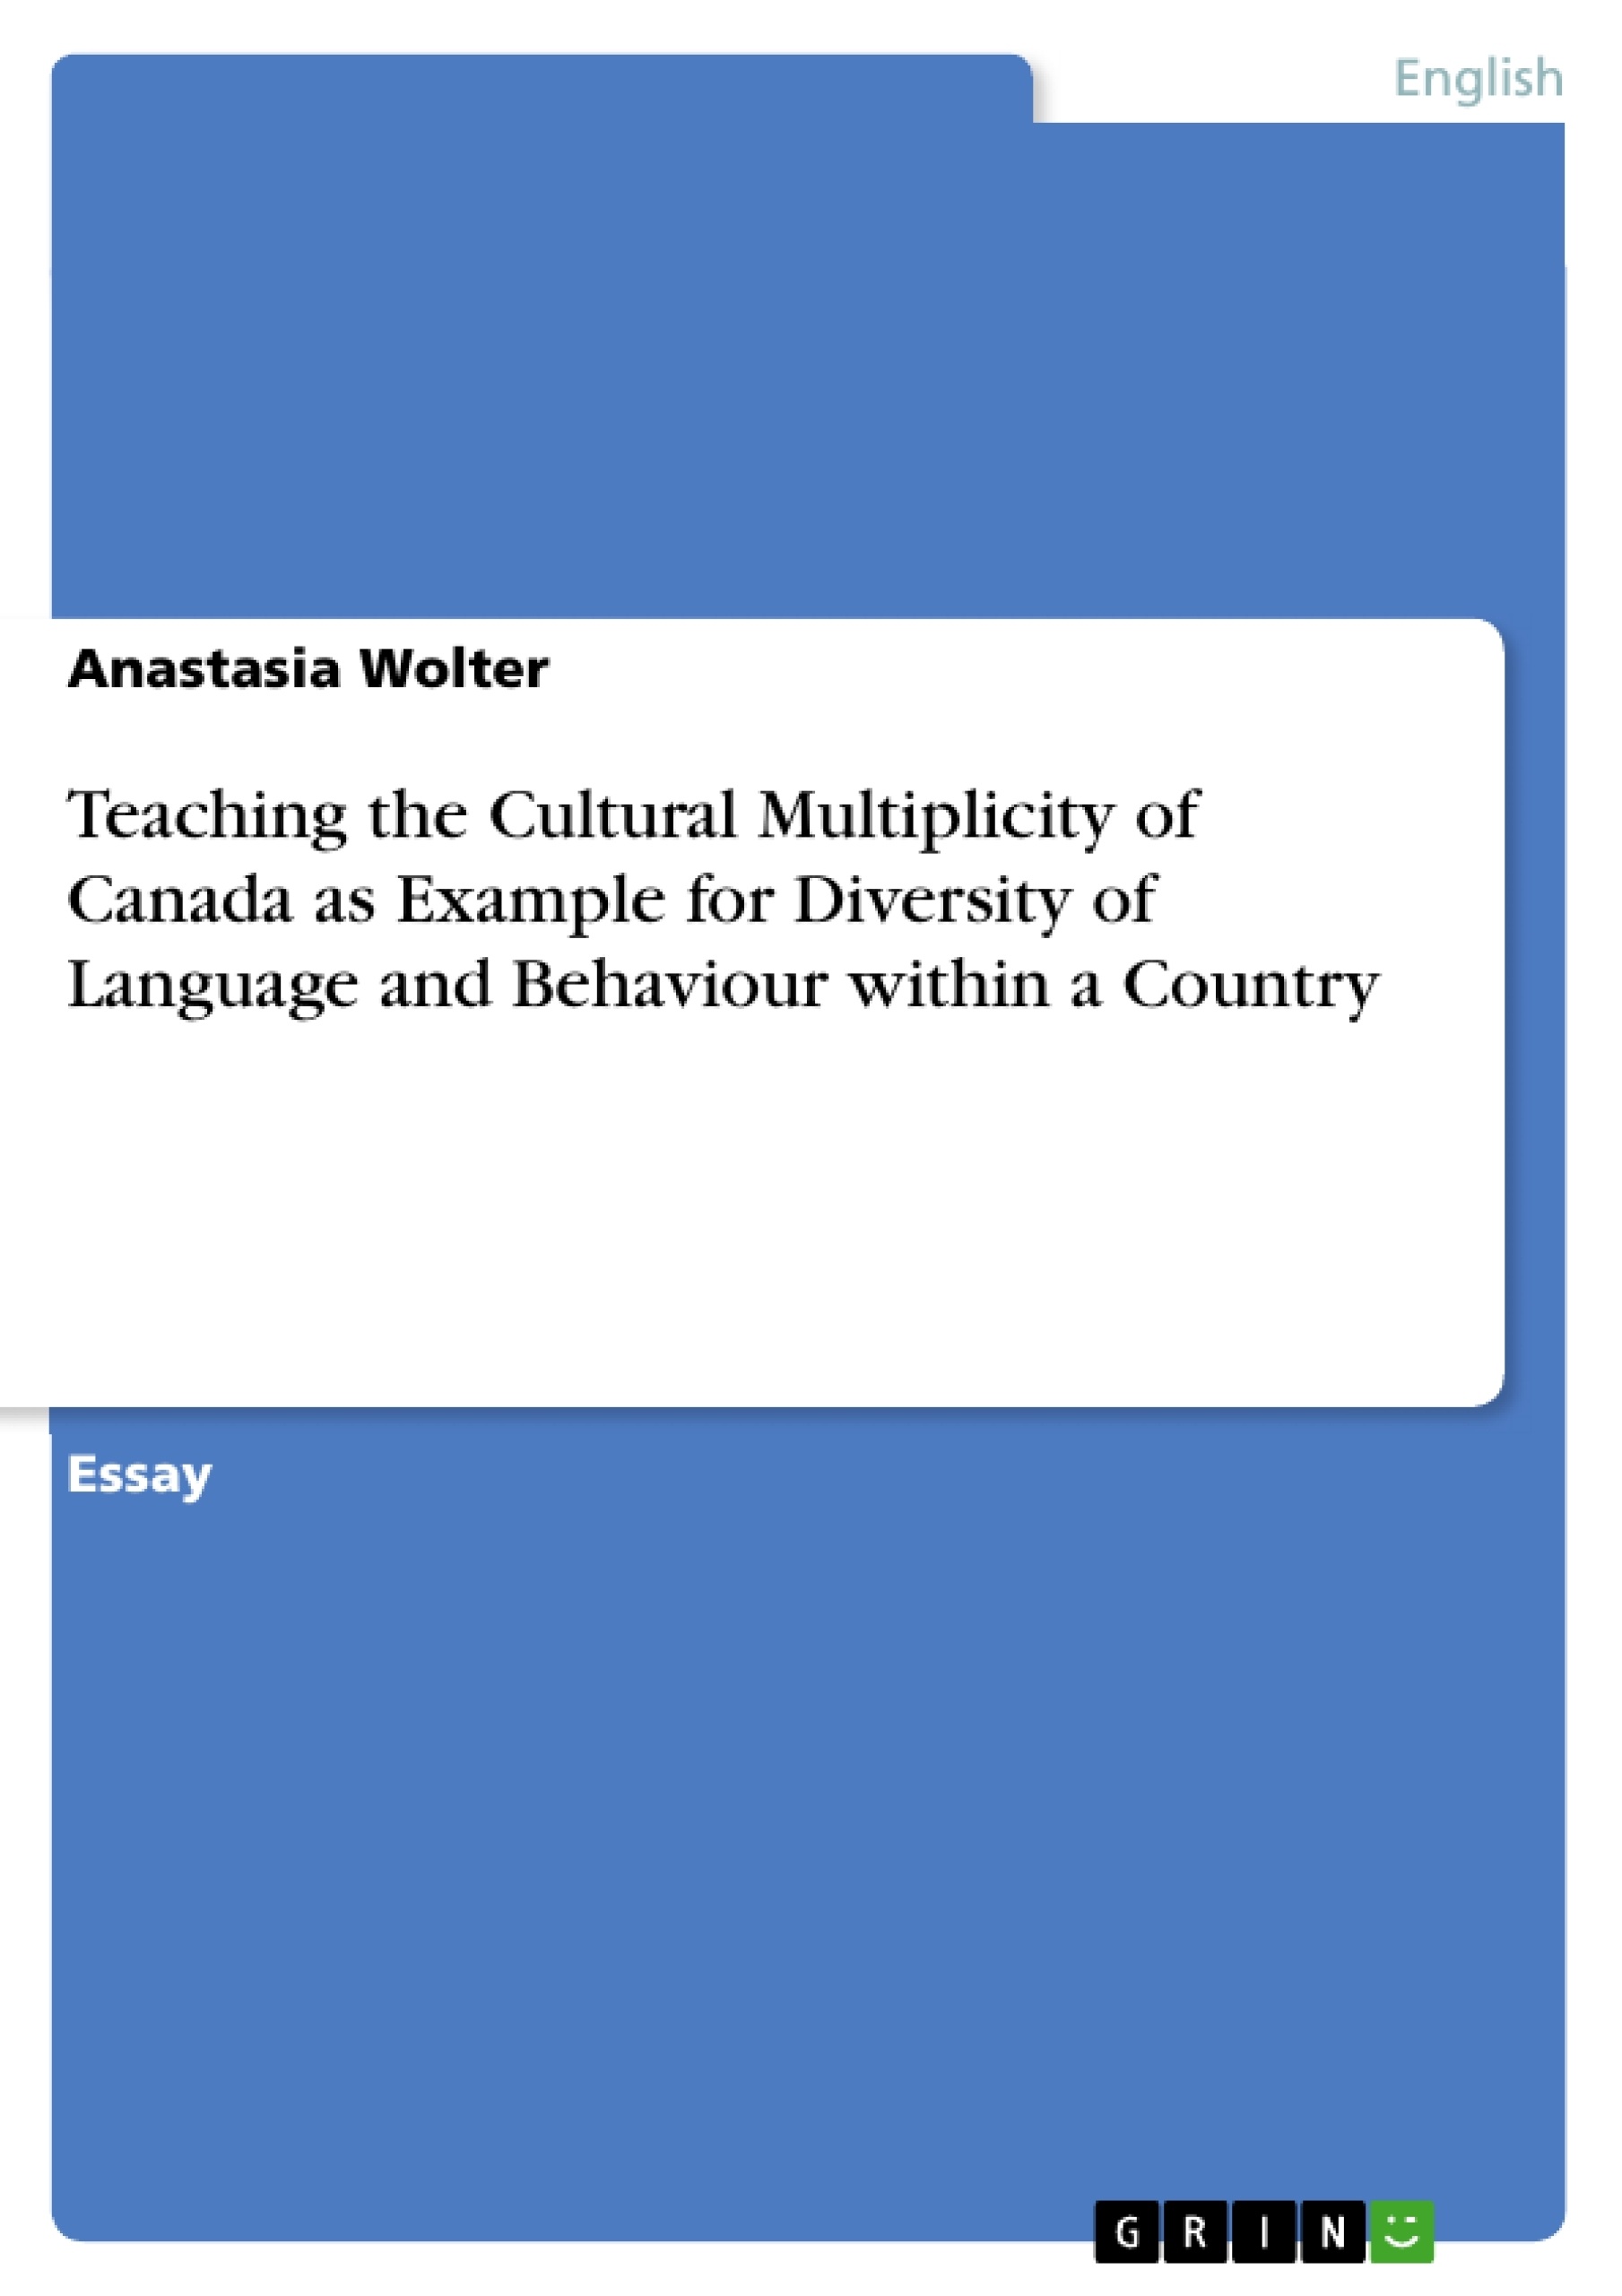 Title: Teaching the Cultural Multiplicity of Canada as Example for Diversity of Language and Behaviour within a Country